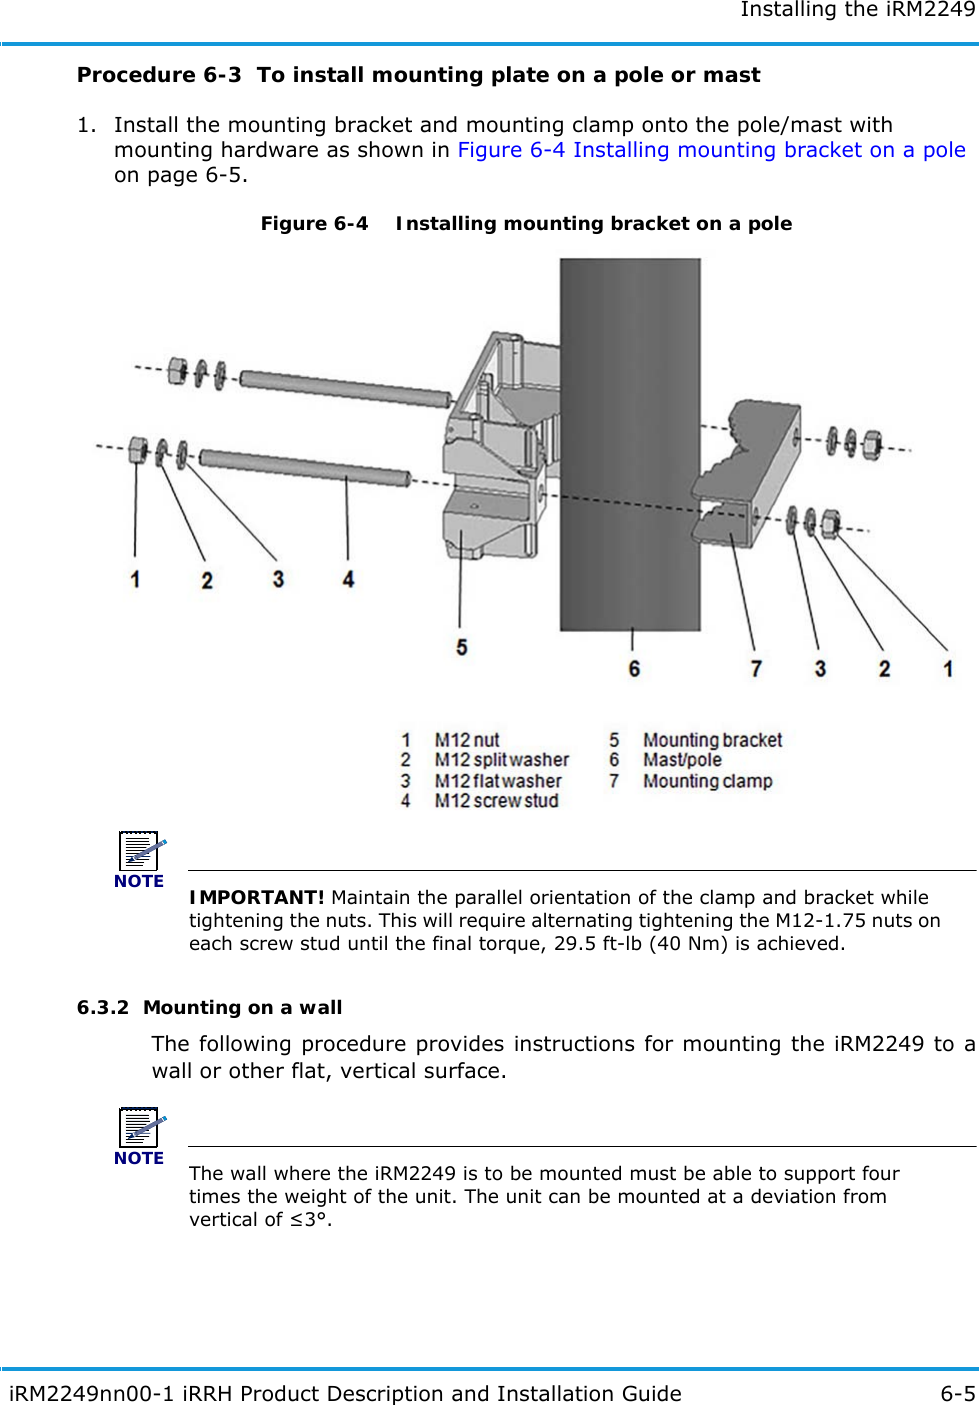 Installing the iRM2249 iRM2249nn00-1 iRRH Product Description and Installation Guide 6-5Procedure 6-3  To install mounting plate on a pole or mast1. Install the mounting bracket and mounting clamp onto the pole/mast with mounting hardware as shown in Figure 6-4 Installing mounting bracket on a pole on page 6-5.Figure 6-4   Installing mounting bracket on a poleNOTEIMPORTANT! Maintain the parallel orientation of the clamp and bracket while tightening the nuts. This will require alternating tightening the M12-1.75 nuts on each screw stud until the final torque, 29.5 ft-lb (40 Nm) is achieved.6.3.2  Mounting on a wallThe following procedure provides instructions for mounting the iRM2249 to a wall or other flat, vertical surface.NOTEThe wall where the iRM2249 is to be mounted must be able to support four times the weight of the unit. The unit can be mounted at a deviation from vertical of 3°.